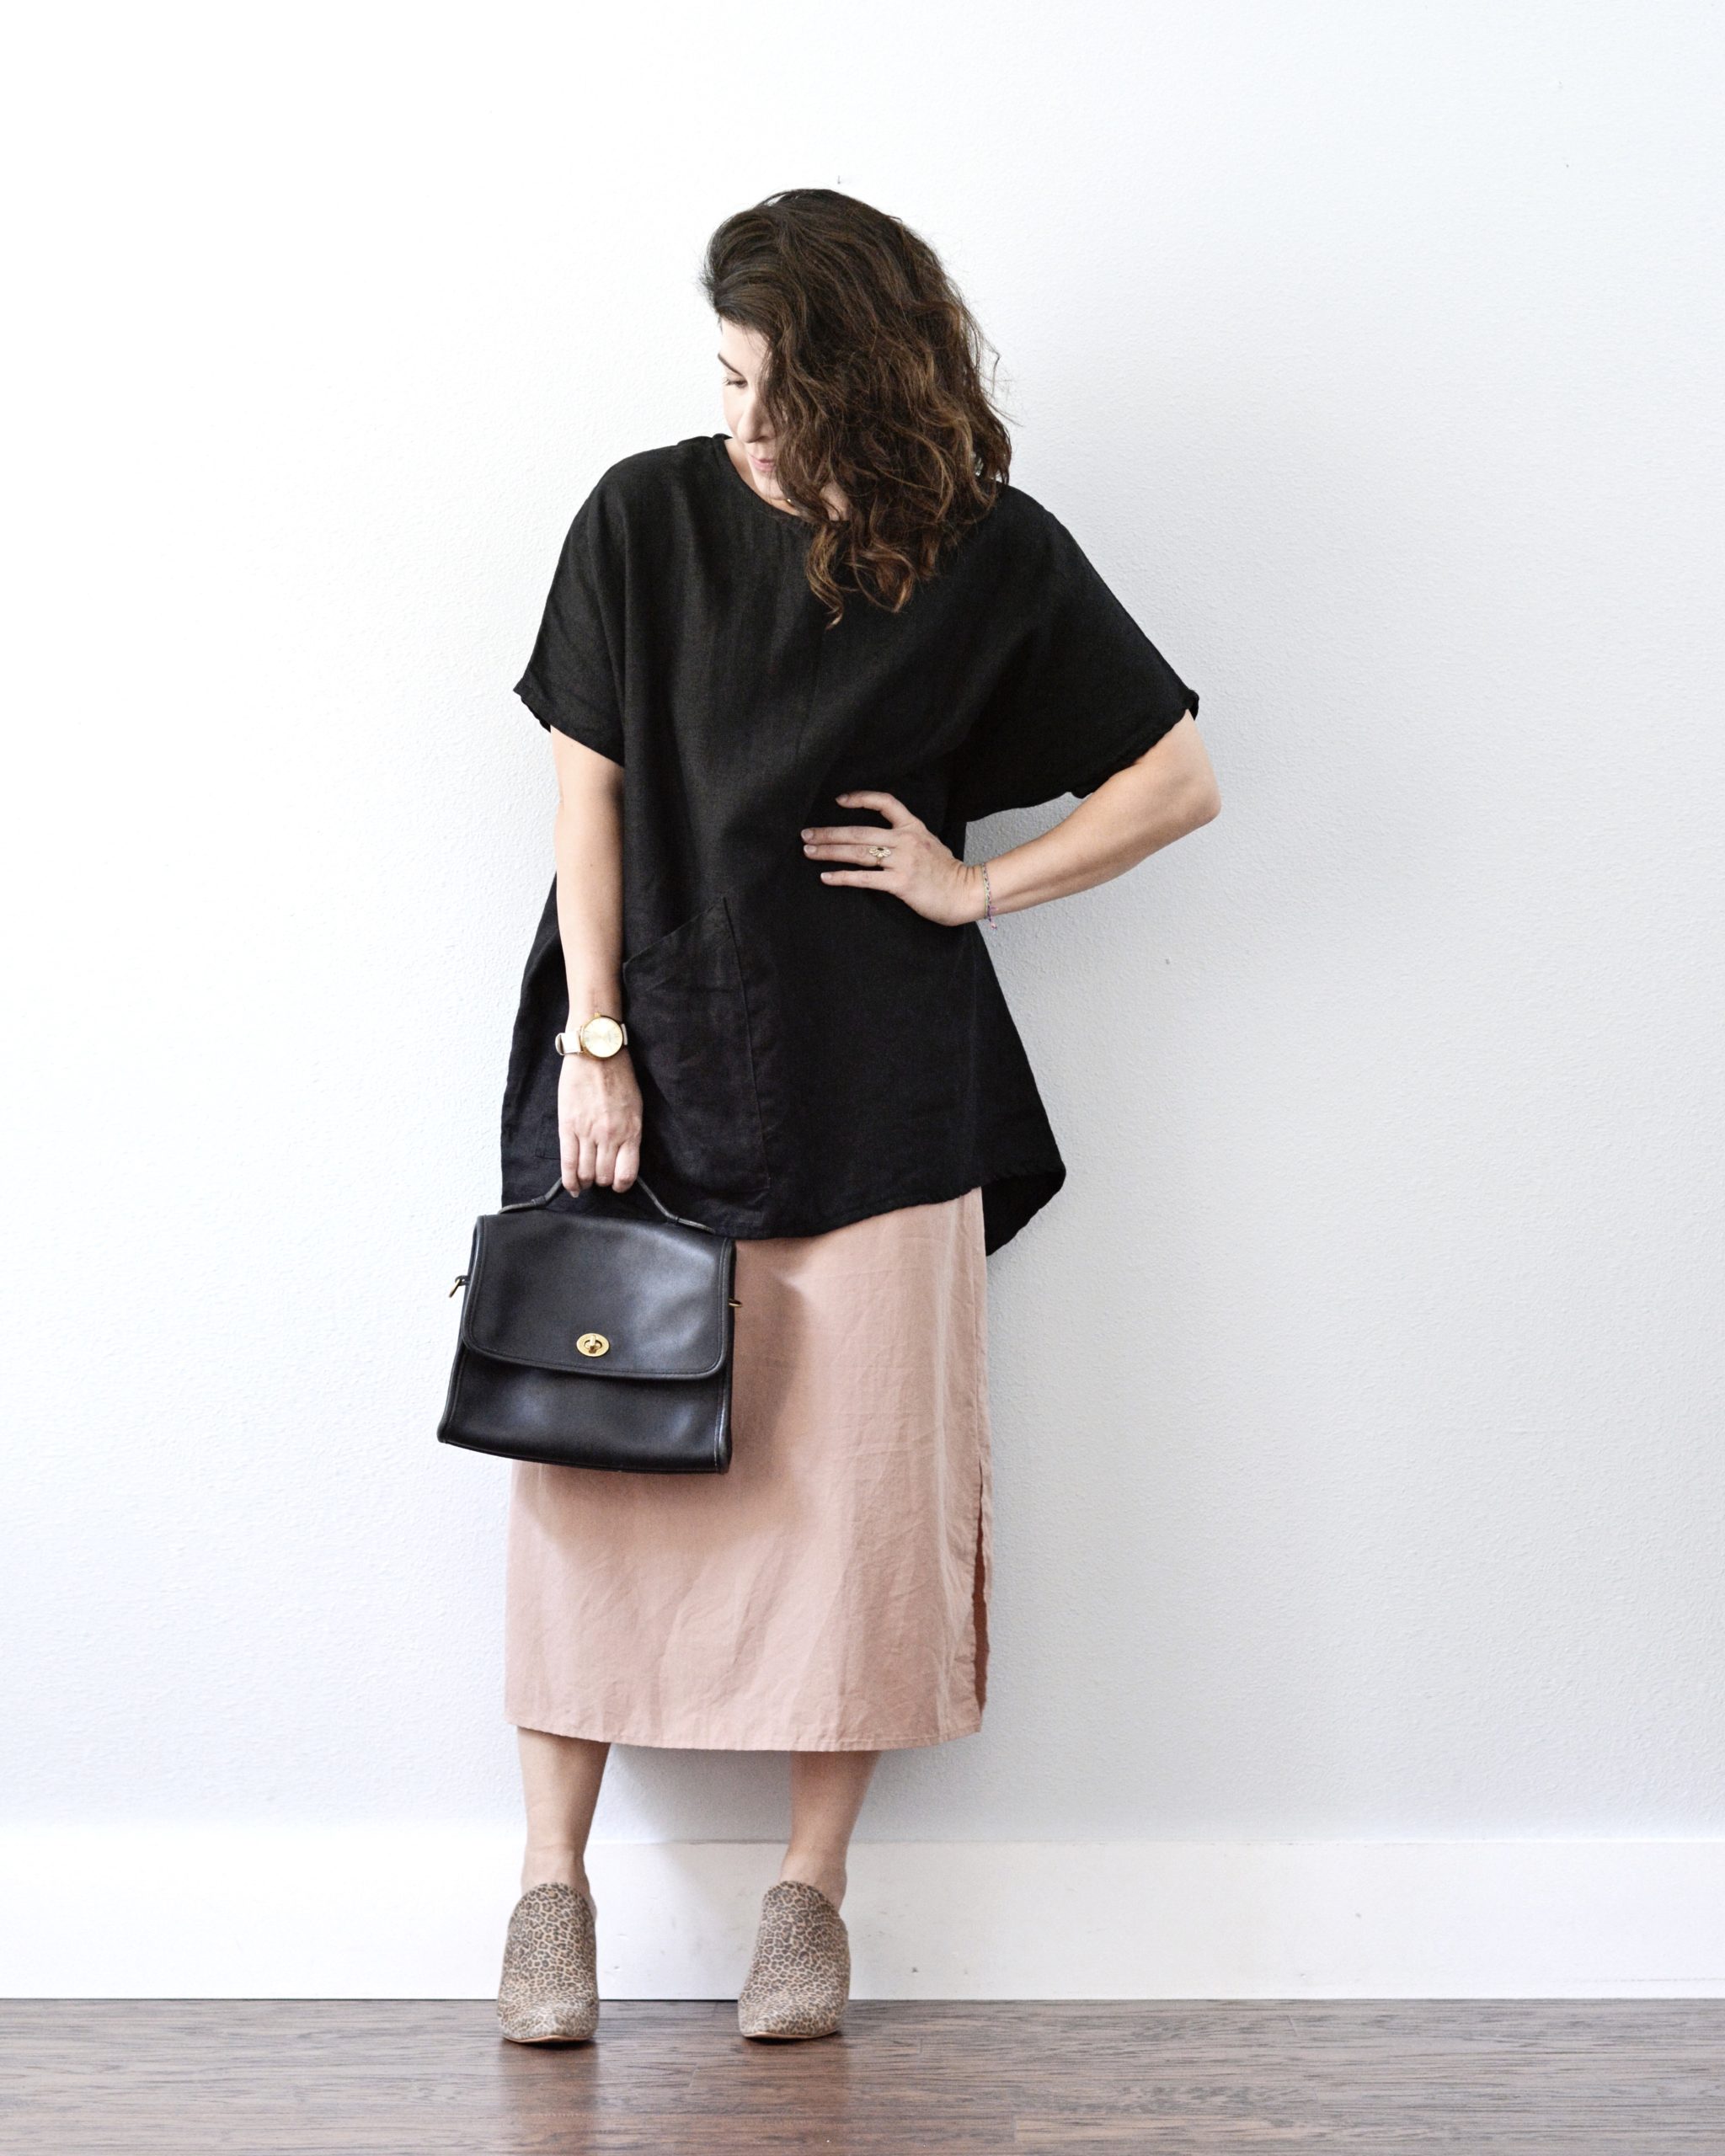 A white woman is standing against a light grey wall. She is wearing a black shirt sleeve tunic over a light pink dress. She is wearing leopard print mules and holding a black handbag in the right hand. Her left hand is on her left hip.